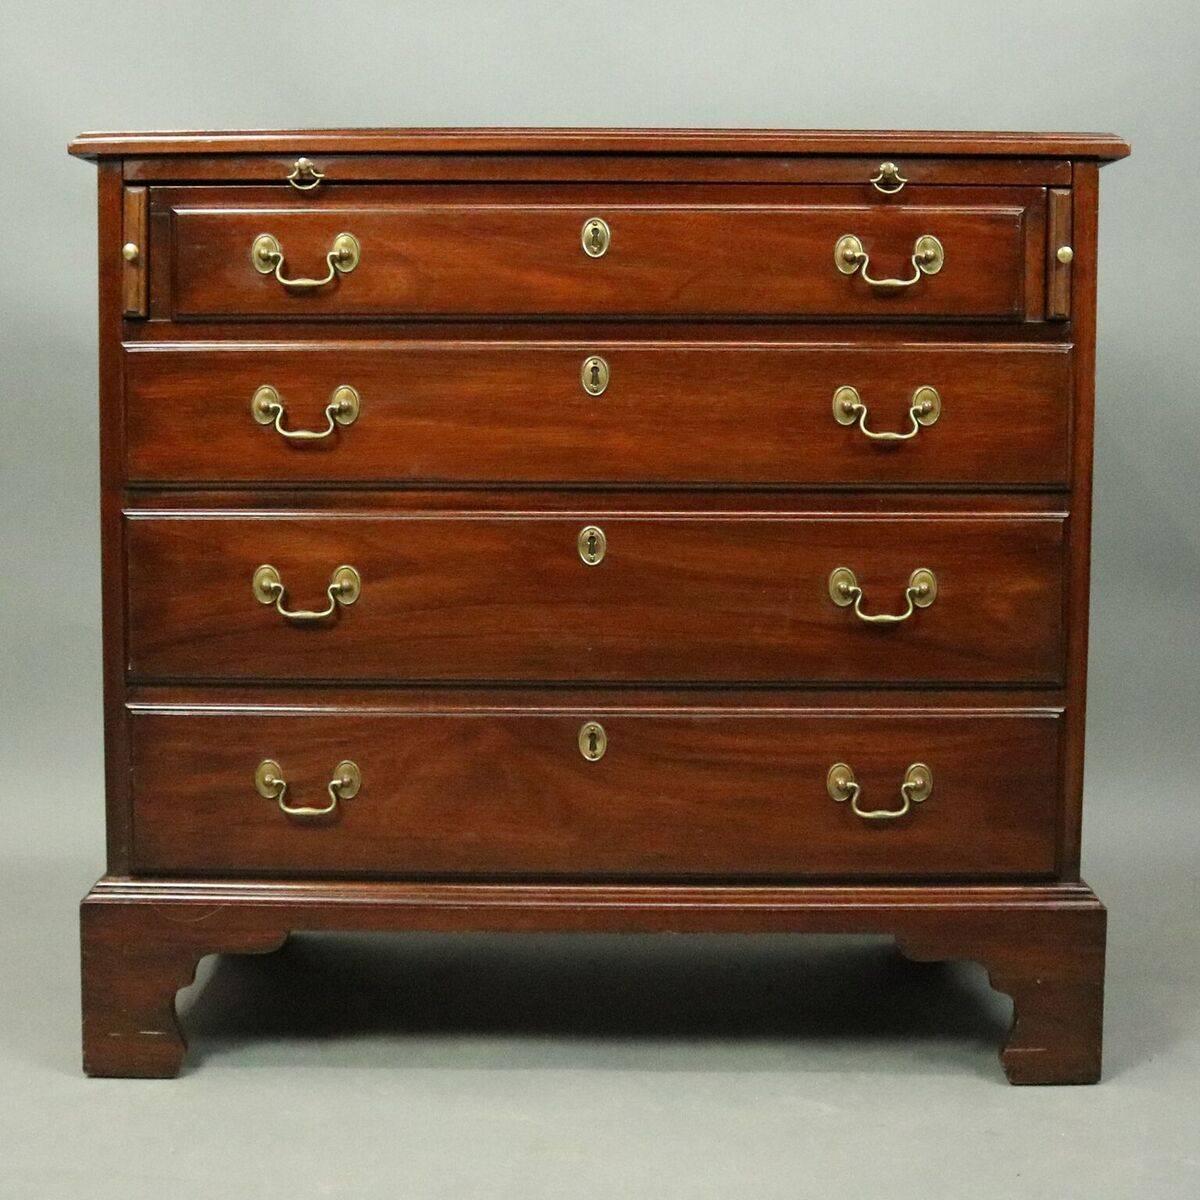 Antique silver chest features four drawers below pull-out surface, bronze pulls, side handles and blind escutcheons; branded/stamped on drawer interior "Virginia Galleries Furniture by Henkel-Harris Winchester, Virginia", circa